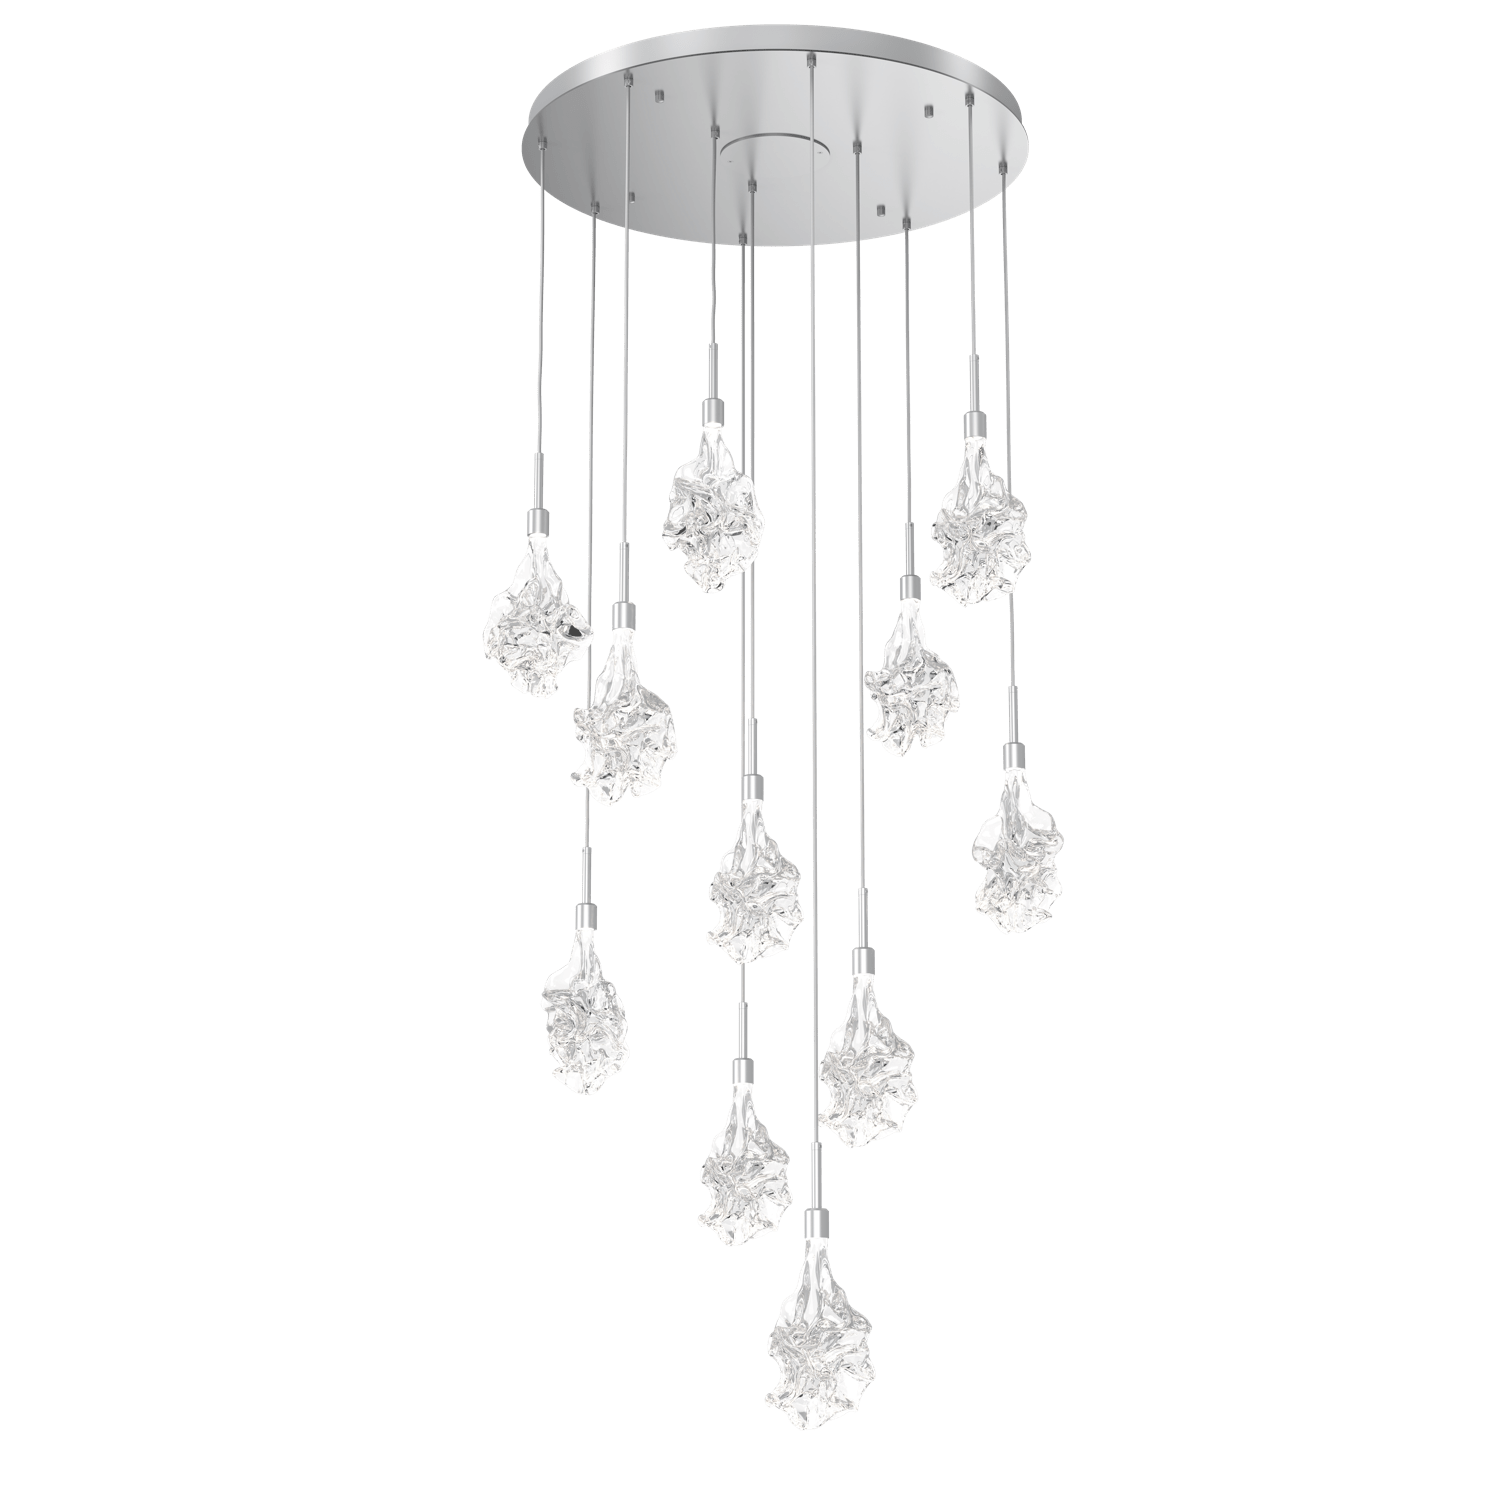 CHB0059-11-CS-Hammerton-Studio-Blossom-11-light-round-pendant-chandelier-with-classic-silver-finish-and-clear-handblown-crystal-glass-shades-and-LED-lamping